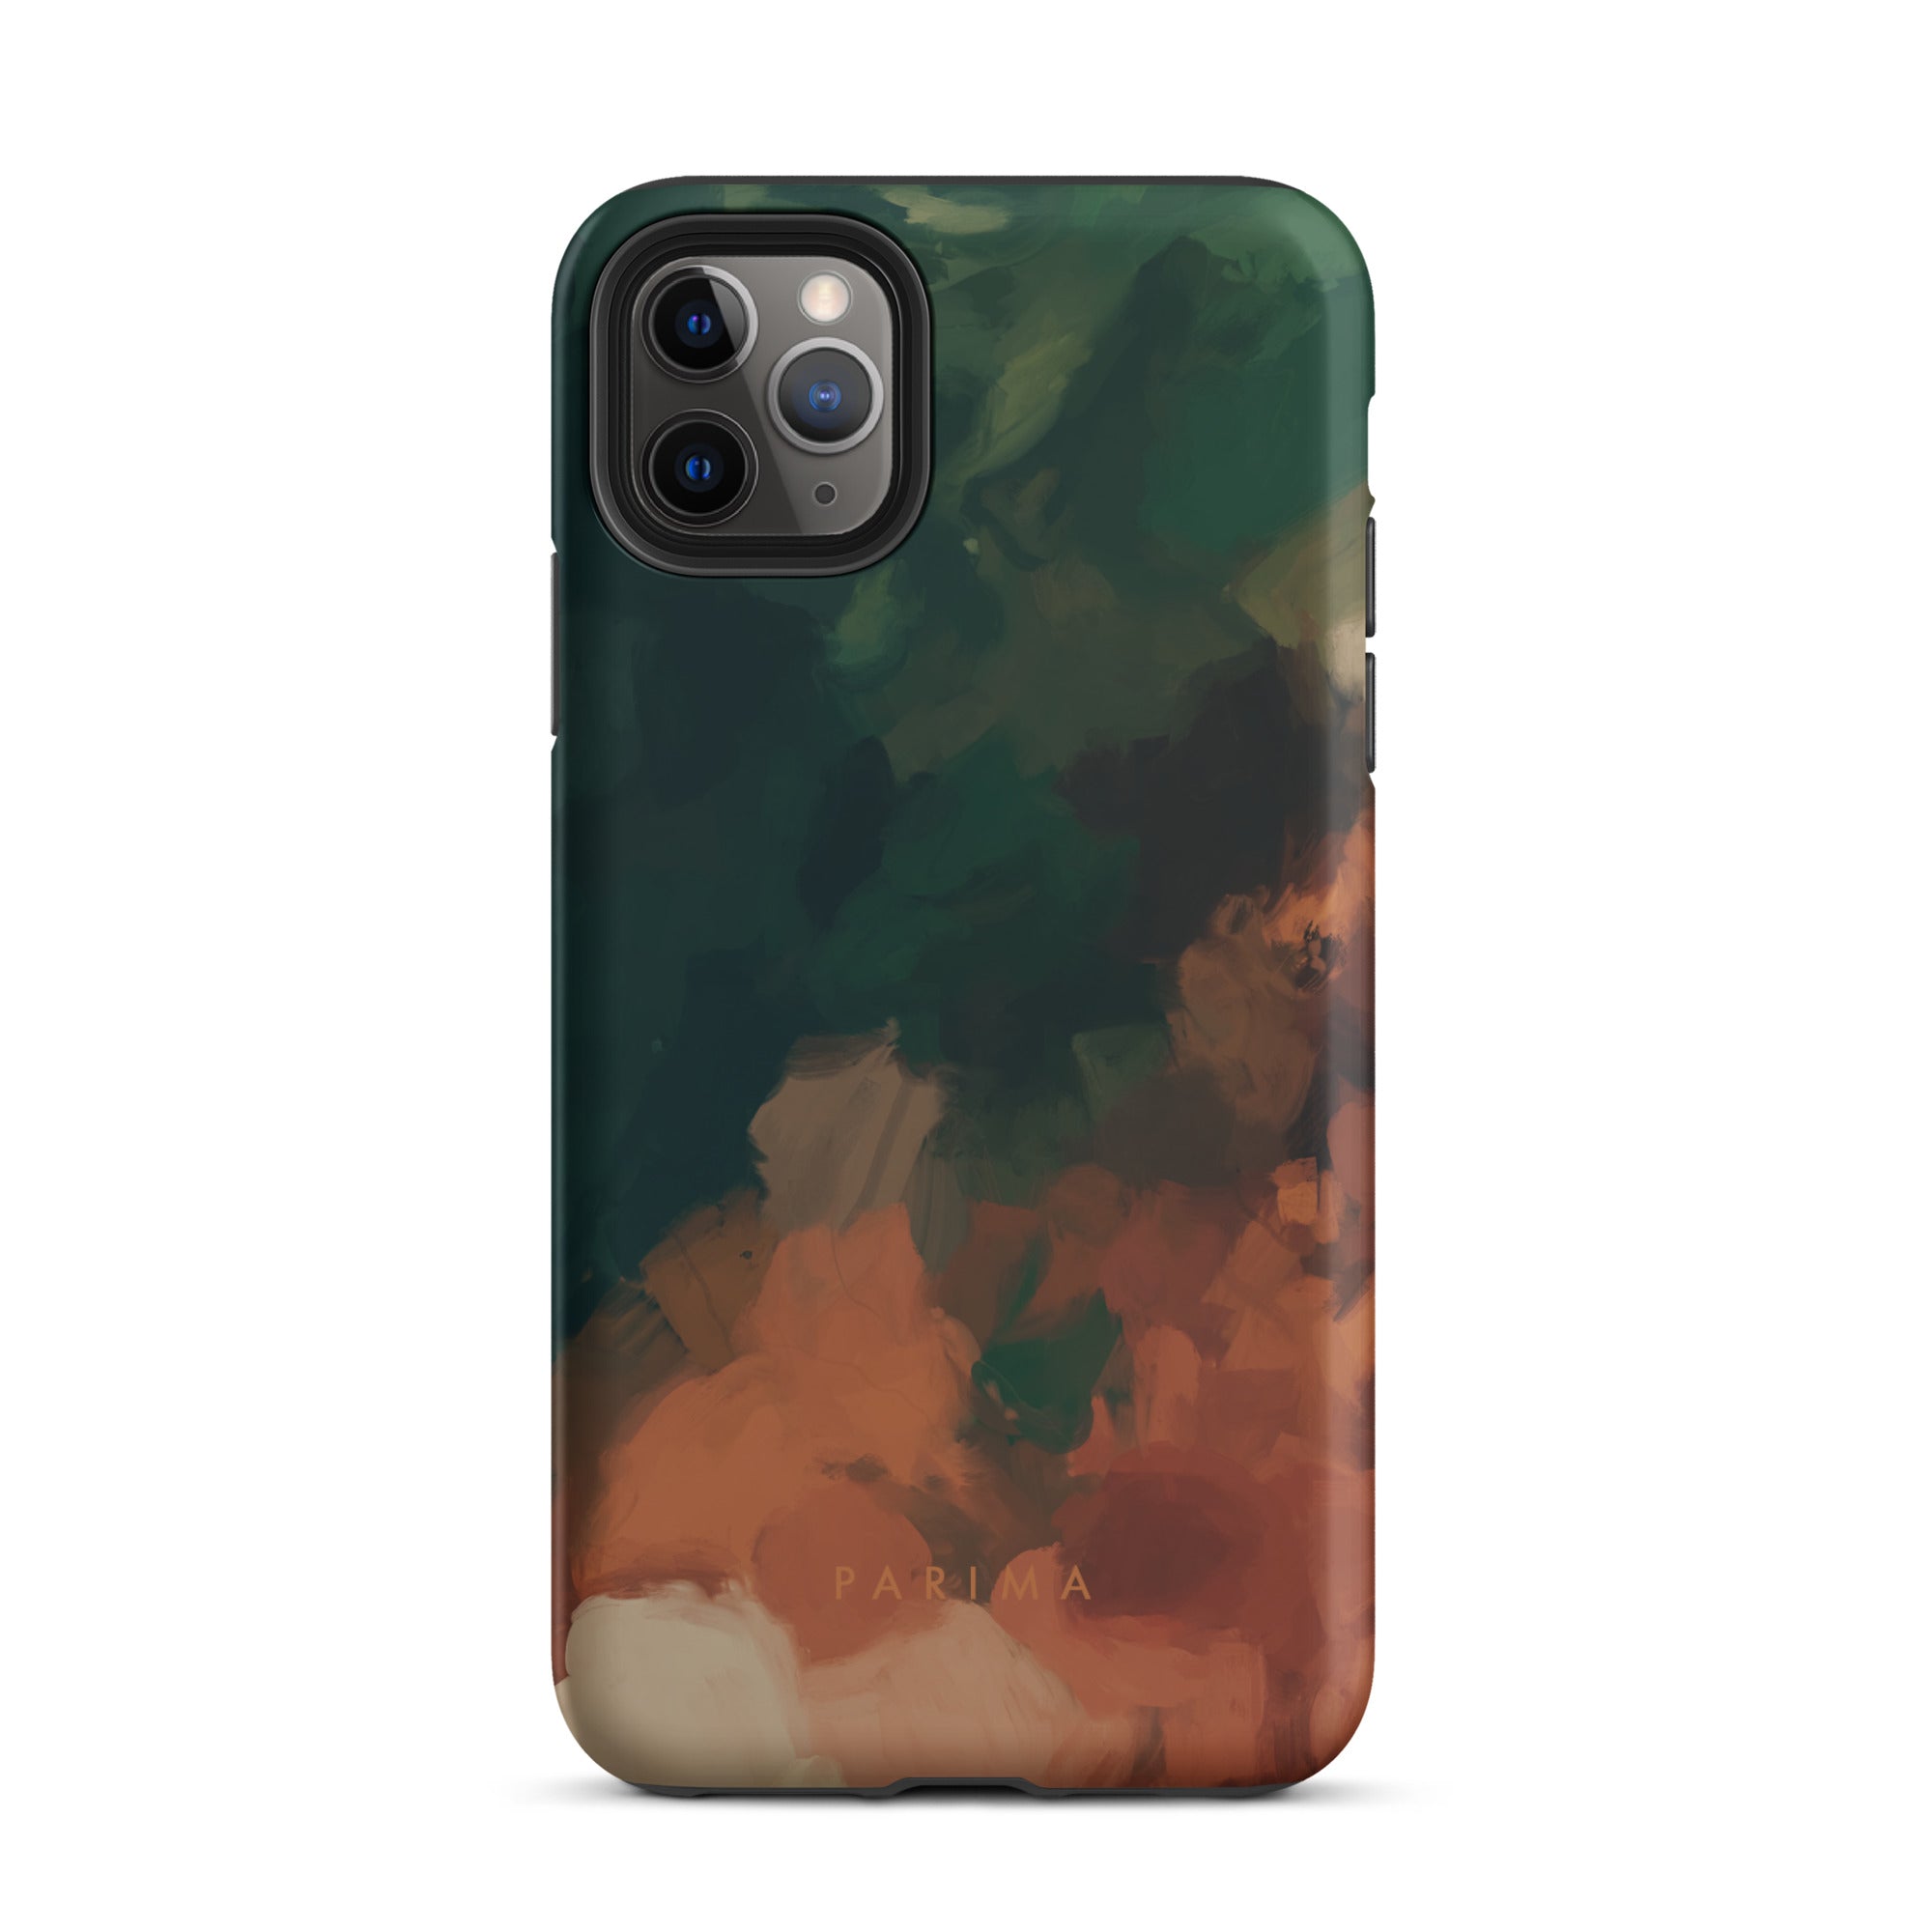 Cedar, green and brown abstract art - iPhone 11 Pro Max tough case by Parima Studio